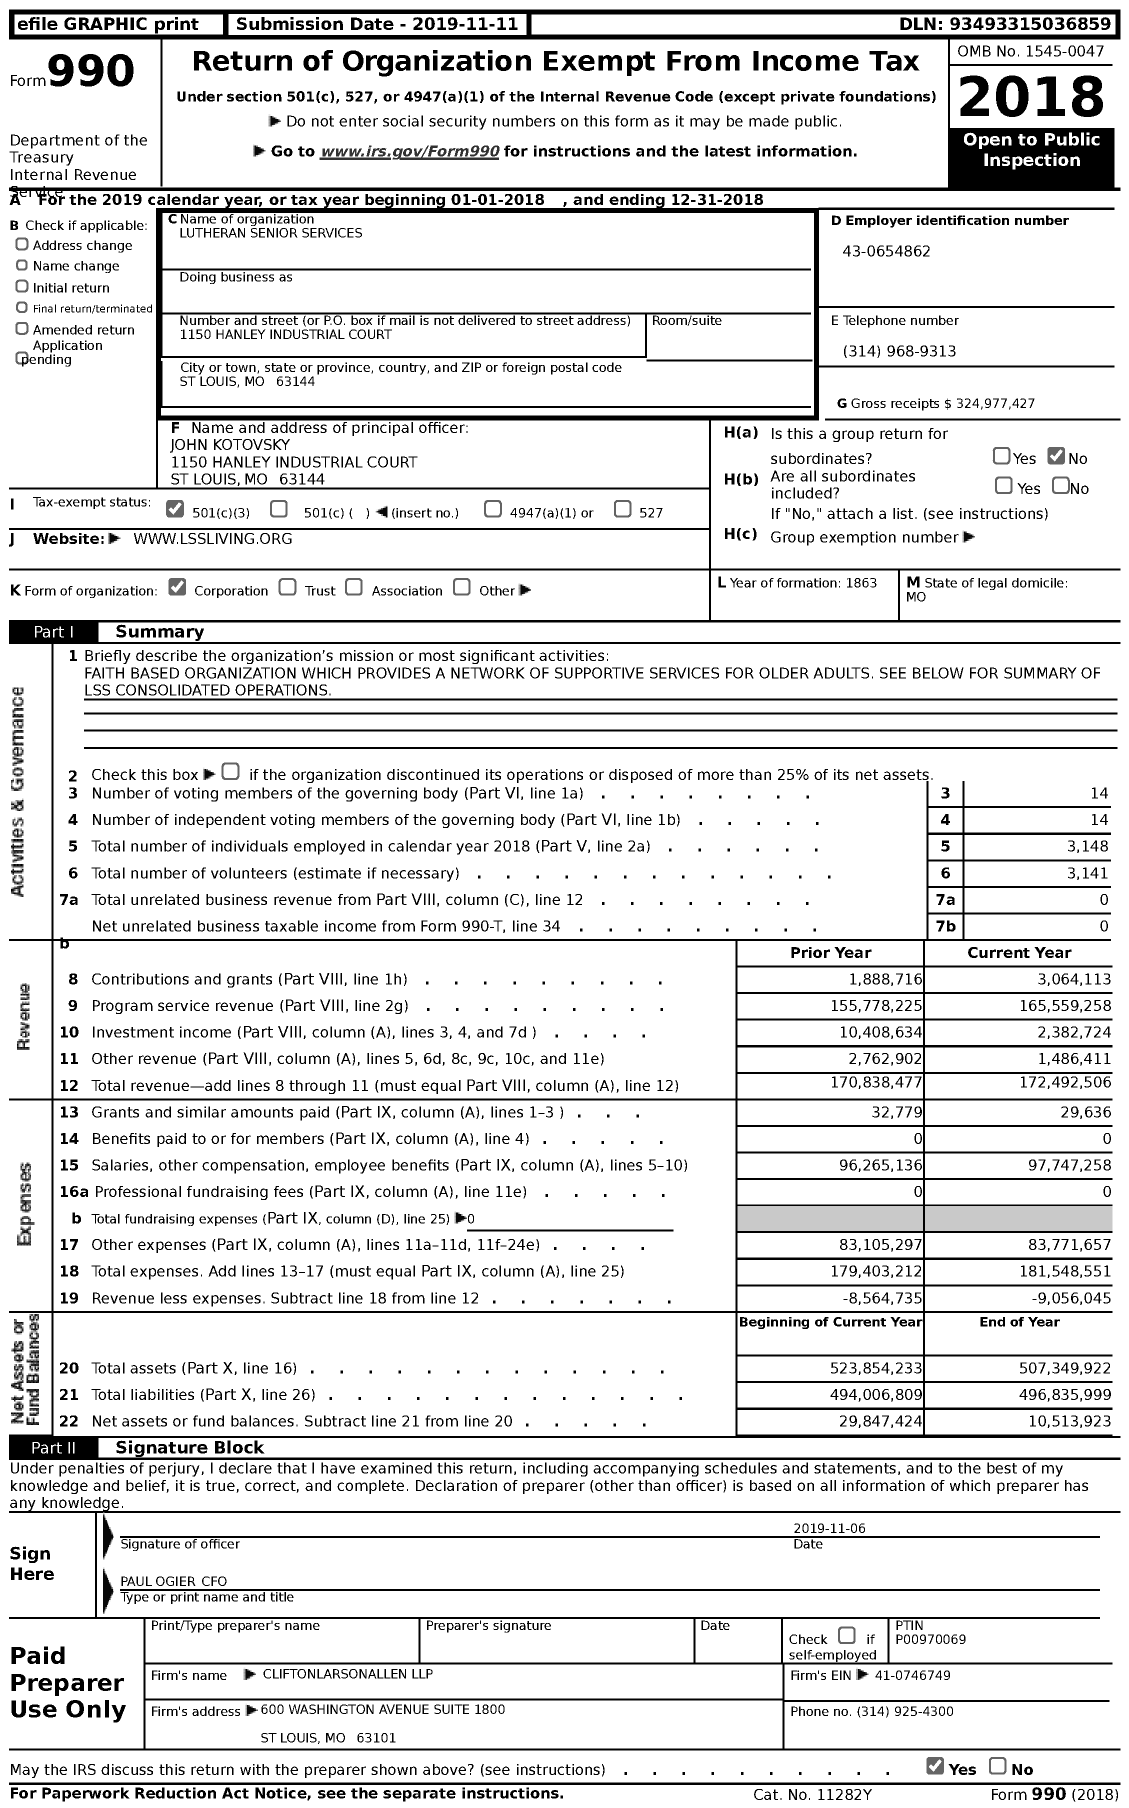 Image of first page of 2018 Form 990 for Lutheran Senior Services (LSS)